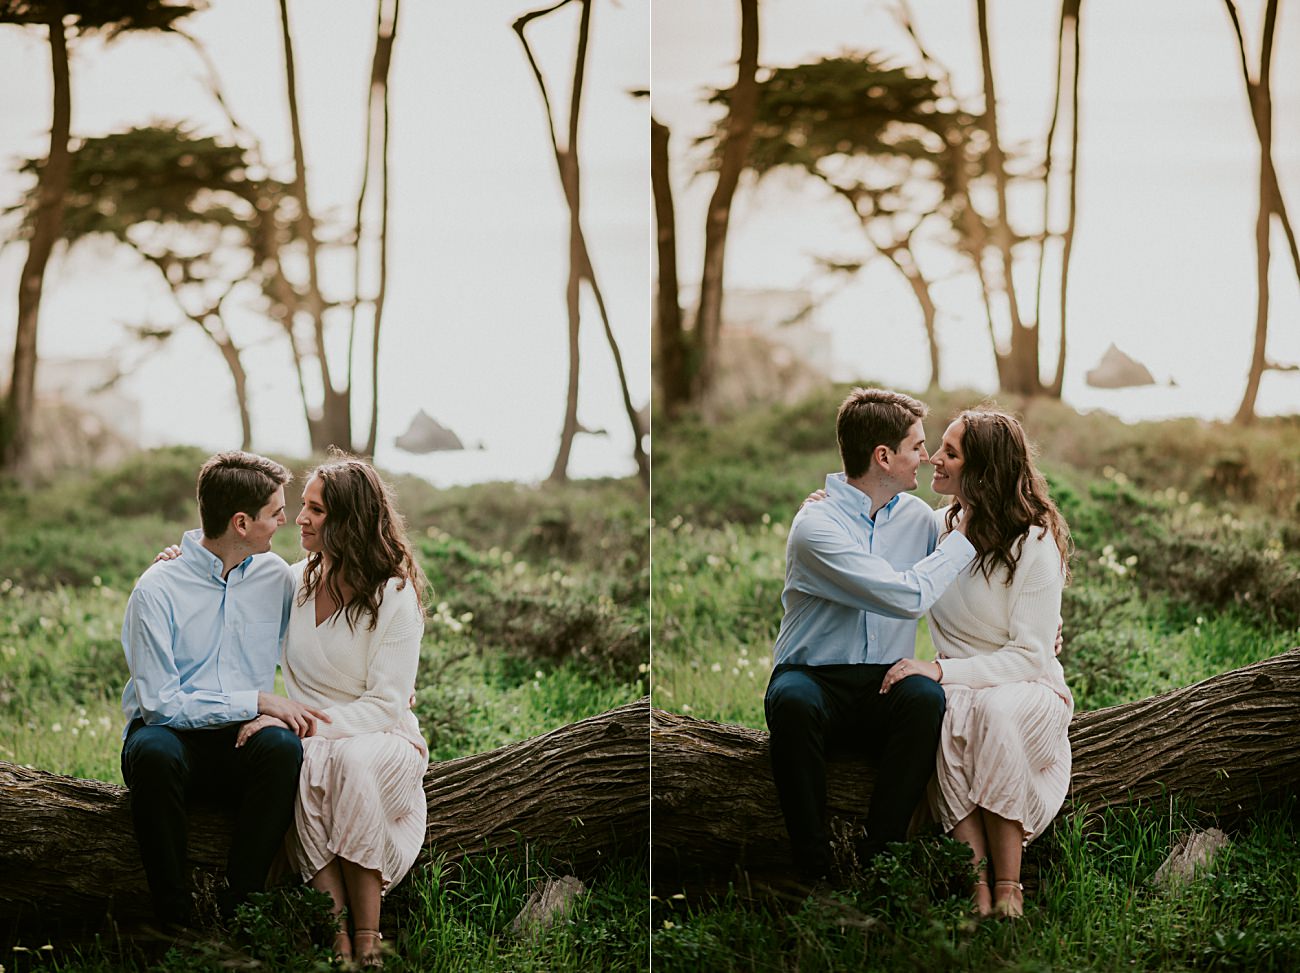 California Engagement Session, What to wear to engagement Session, Woodsy Engagement, California Engagement